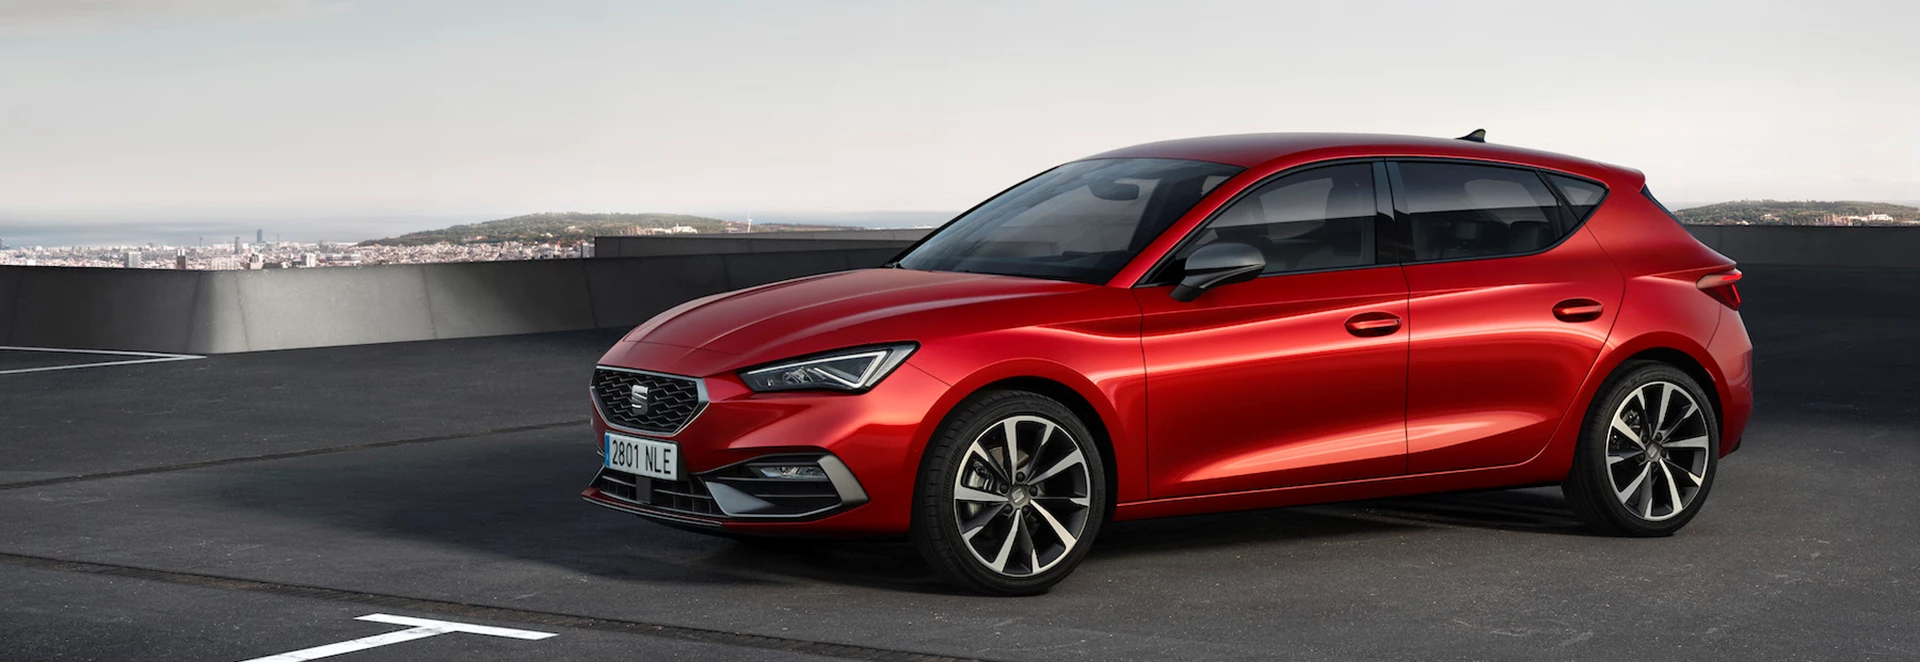 All-new Seat Leon revealed with more space and hybrid powertrains